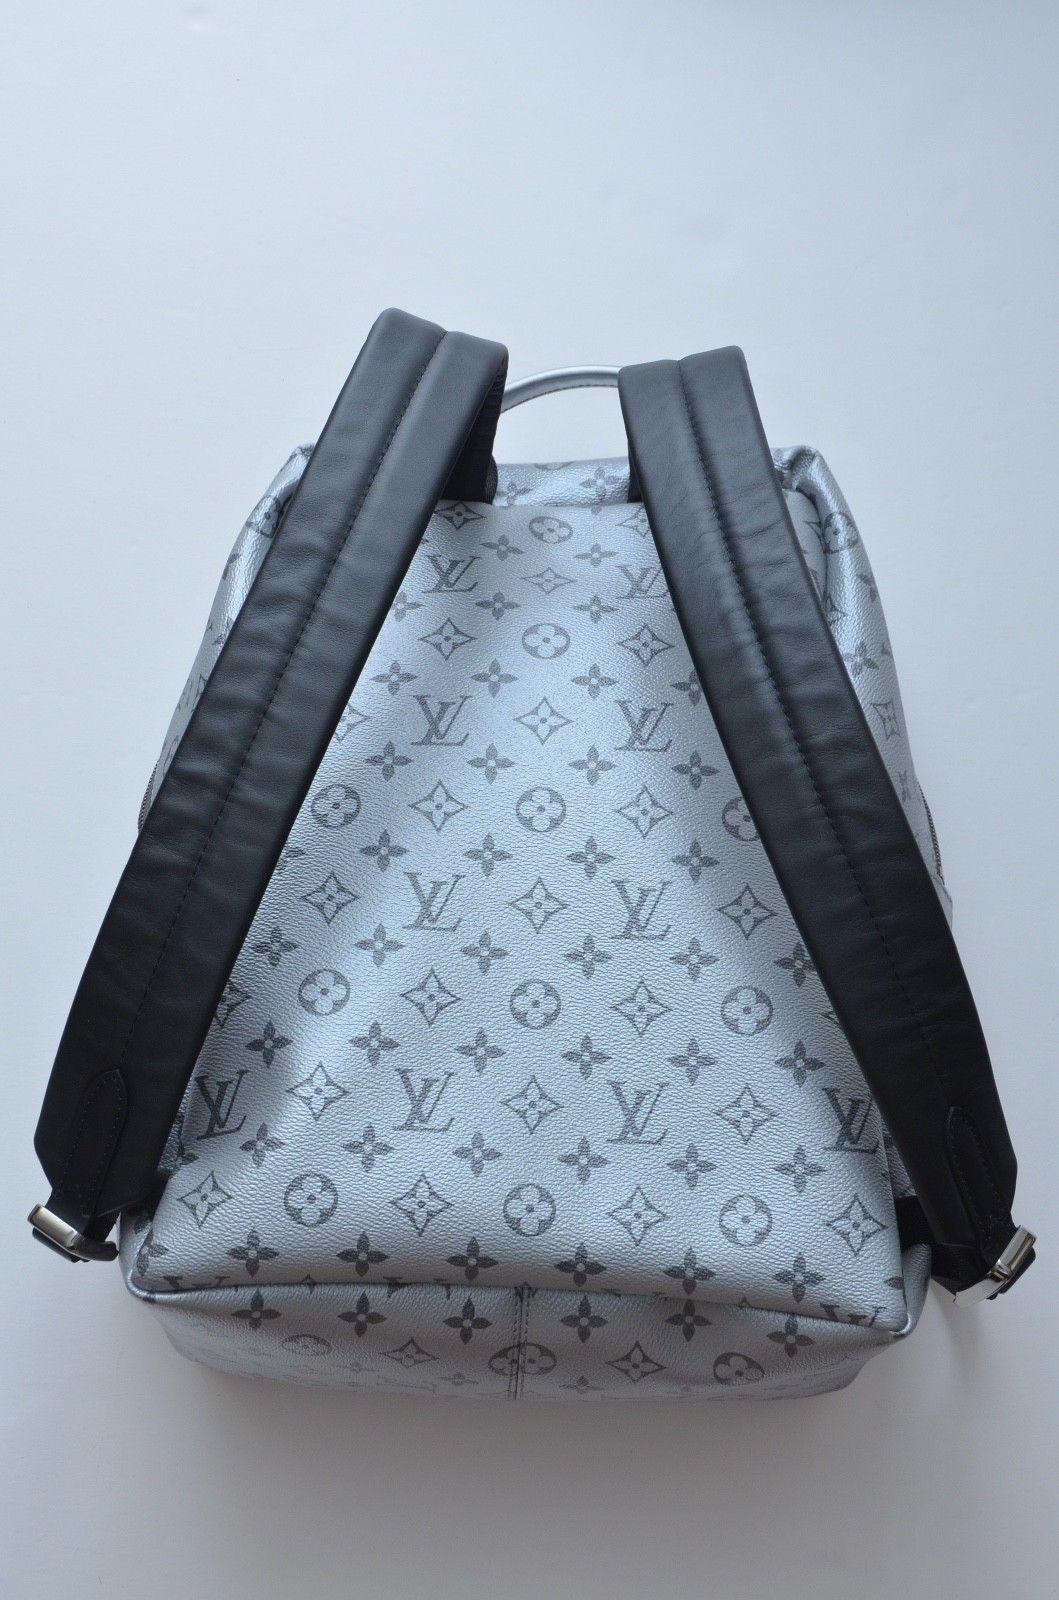 silver louis vuitton backpack